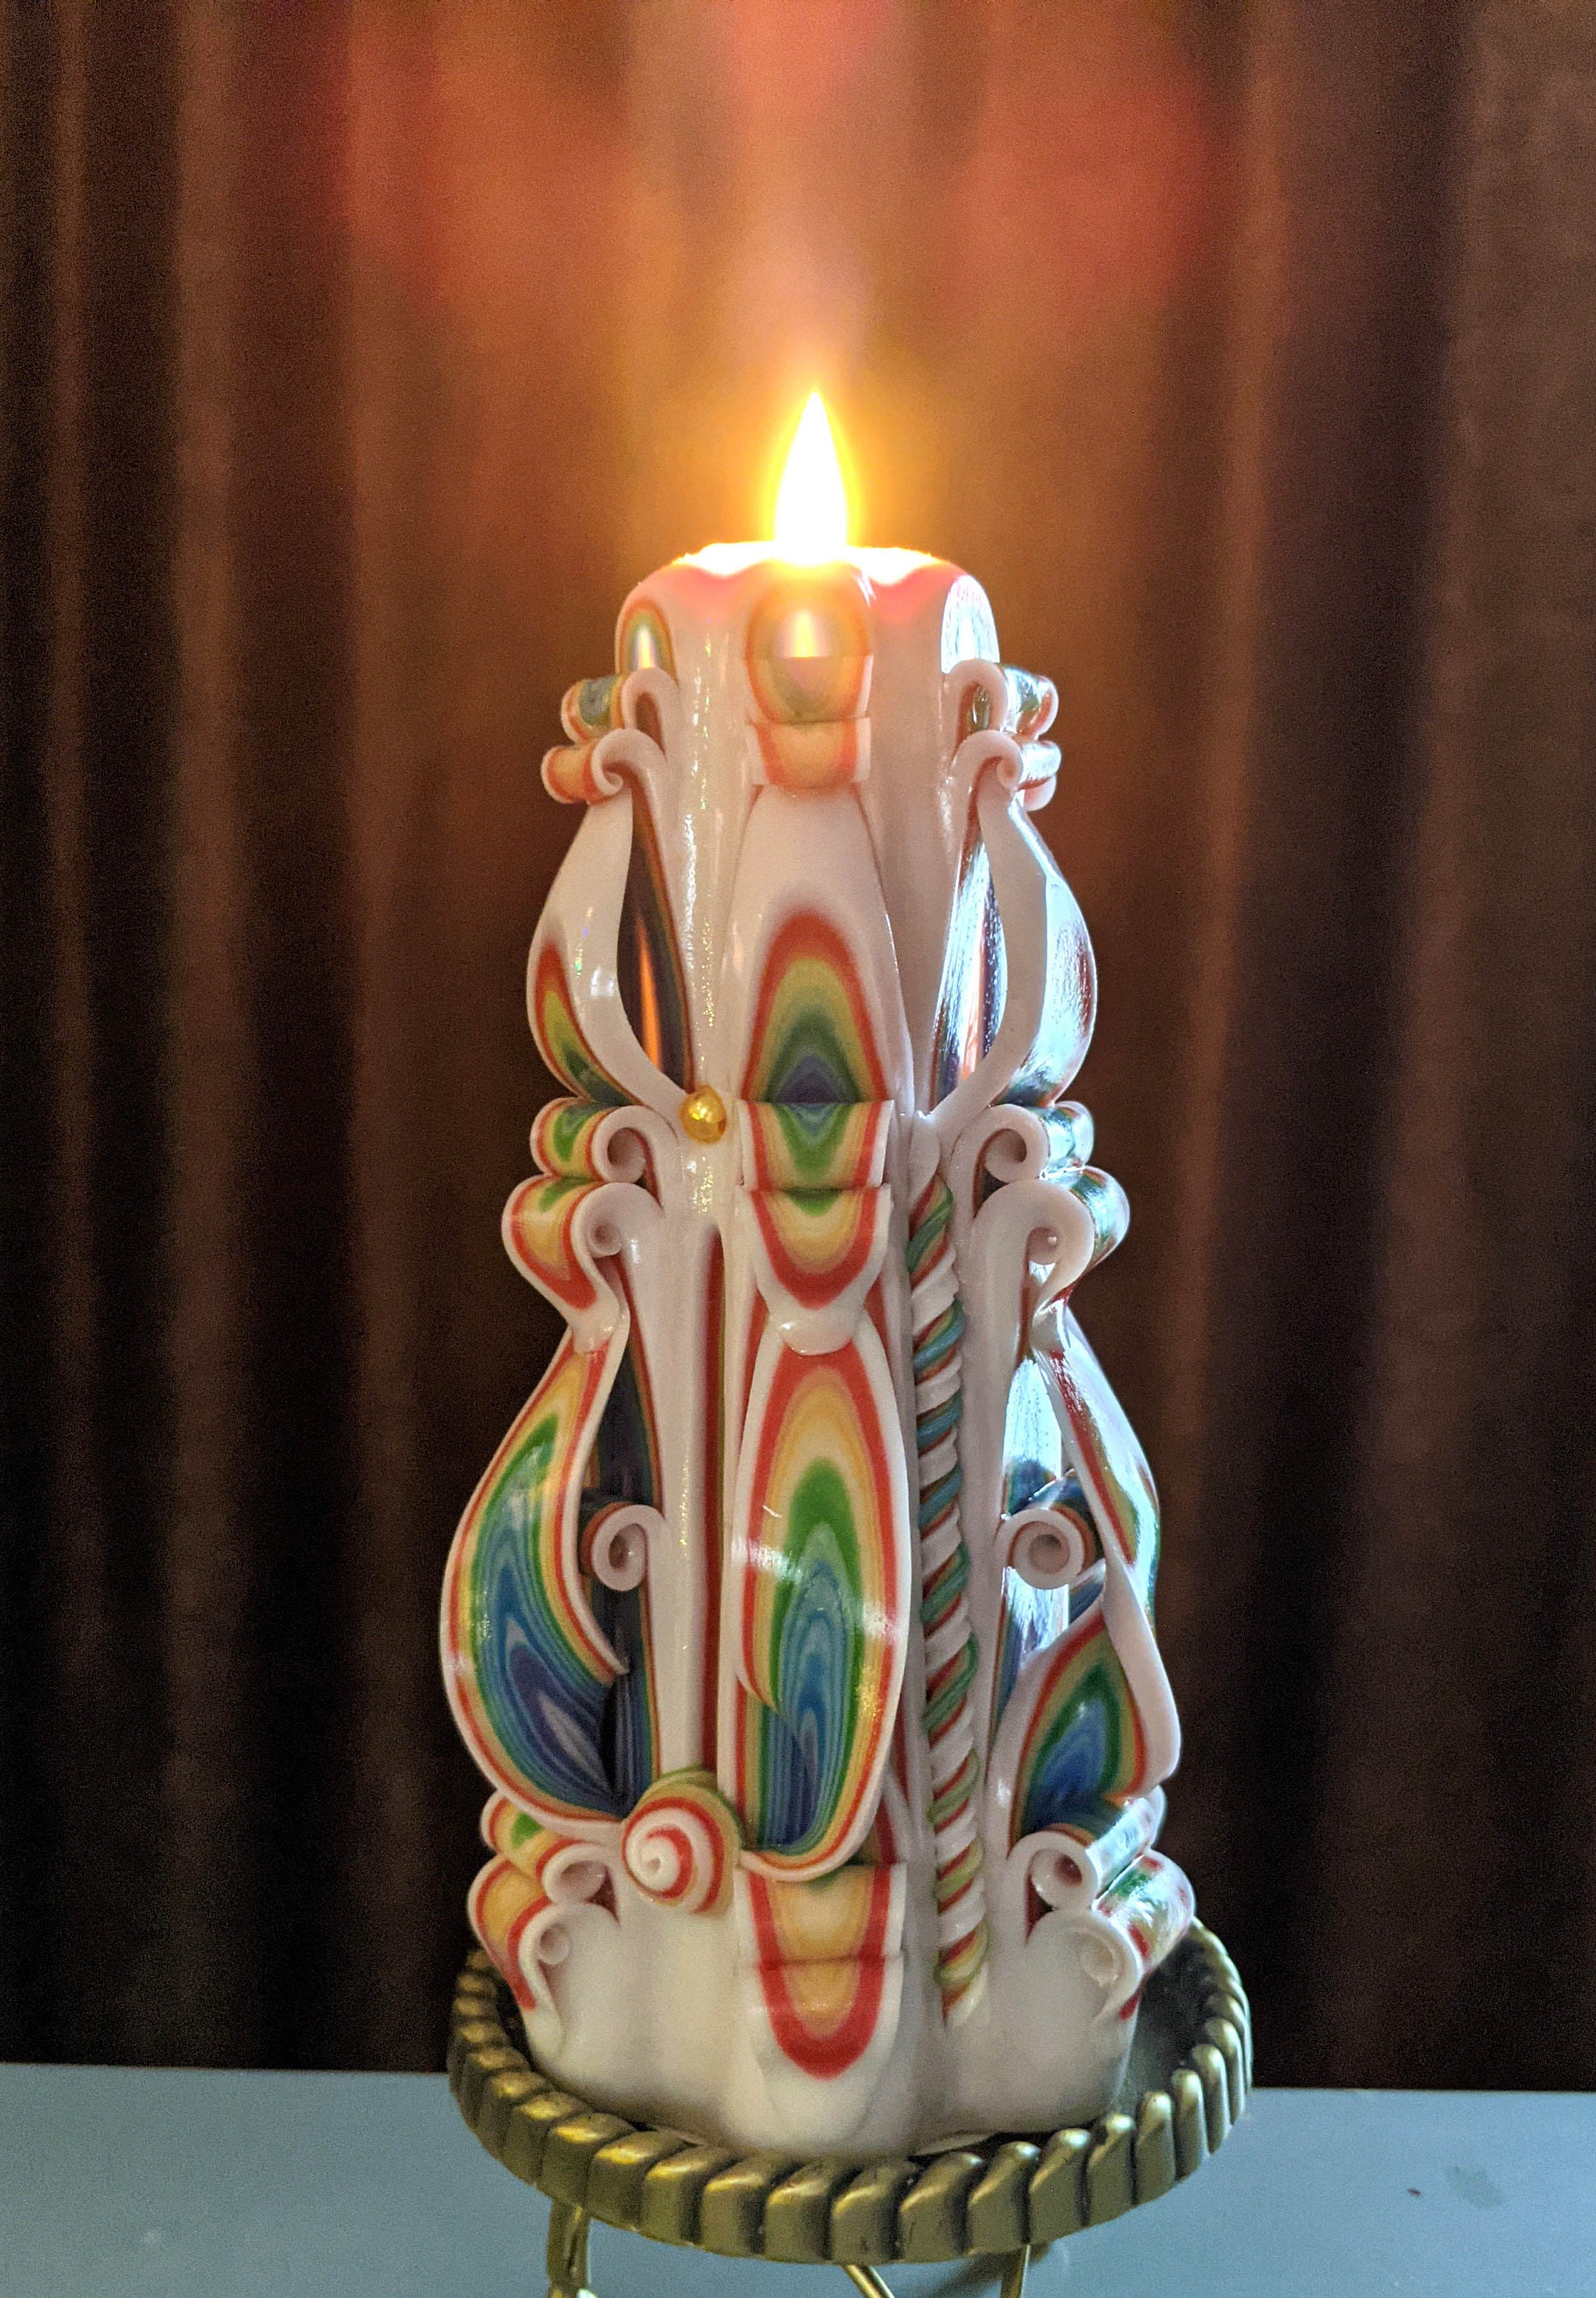 Pin by Arif Keçecioğlu on mumlar  Hand painted candles, Painted candles,  Candle carving